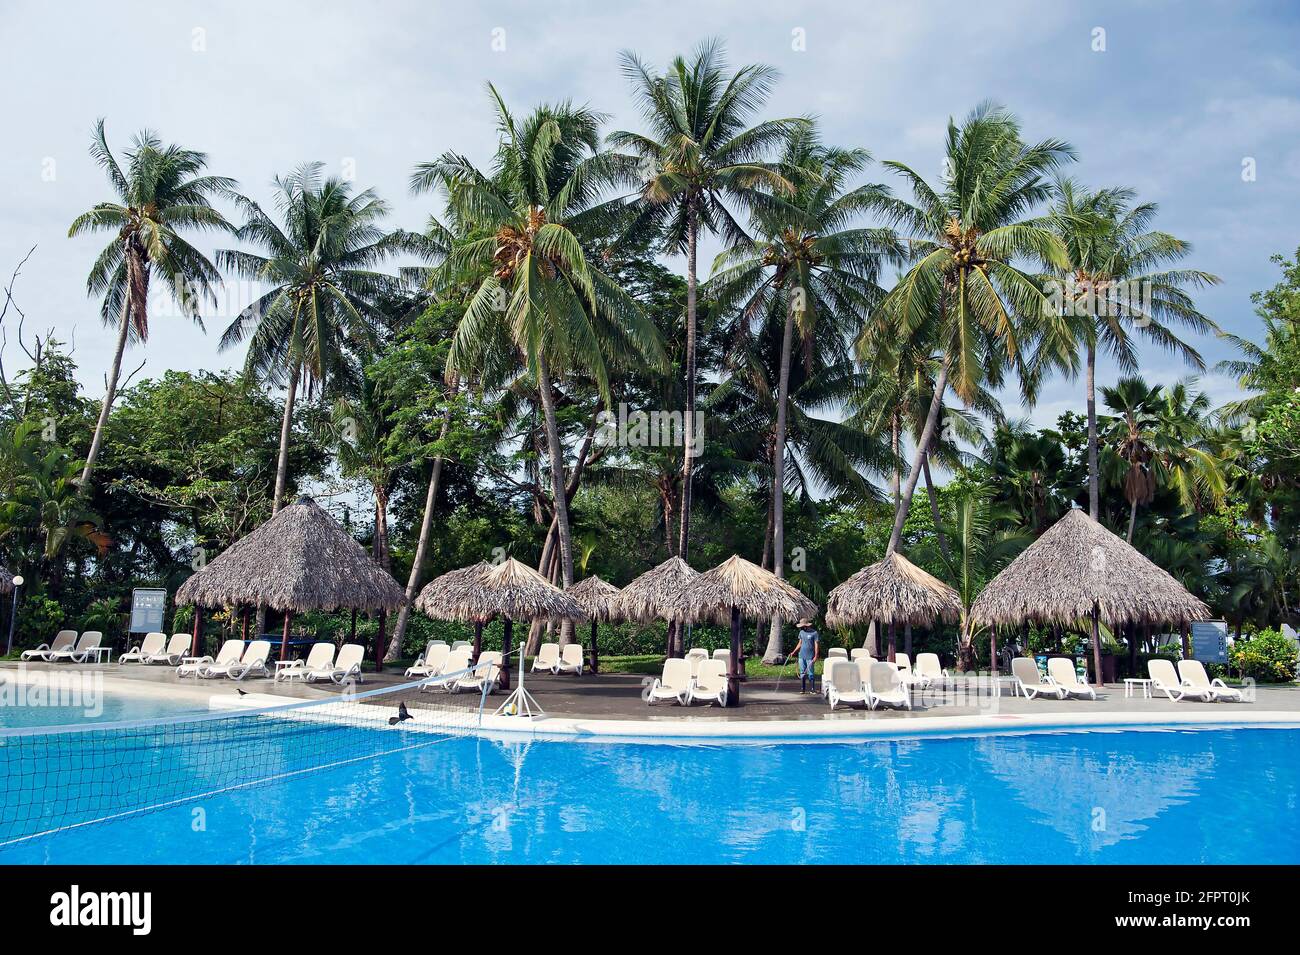 Pool with palm trees and palapas at resort in Tamarindo, Costa Rica Stock Photo